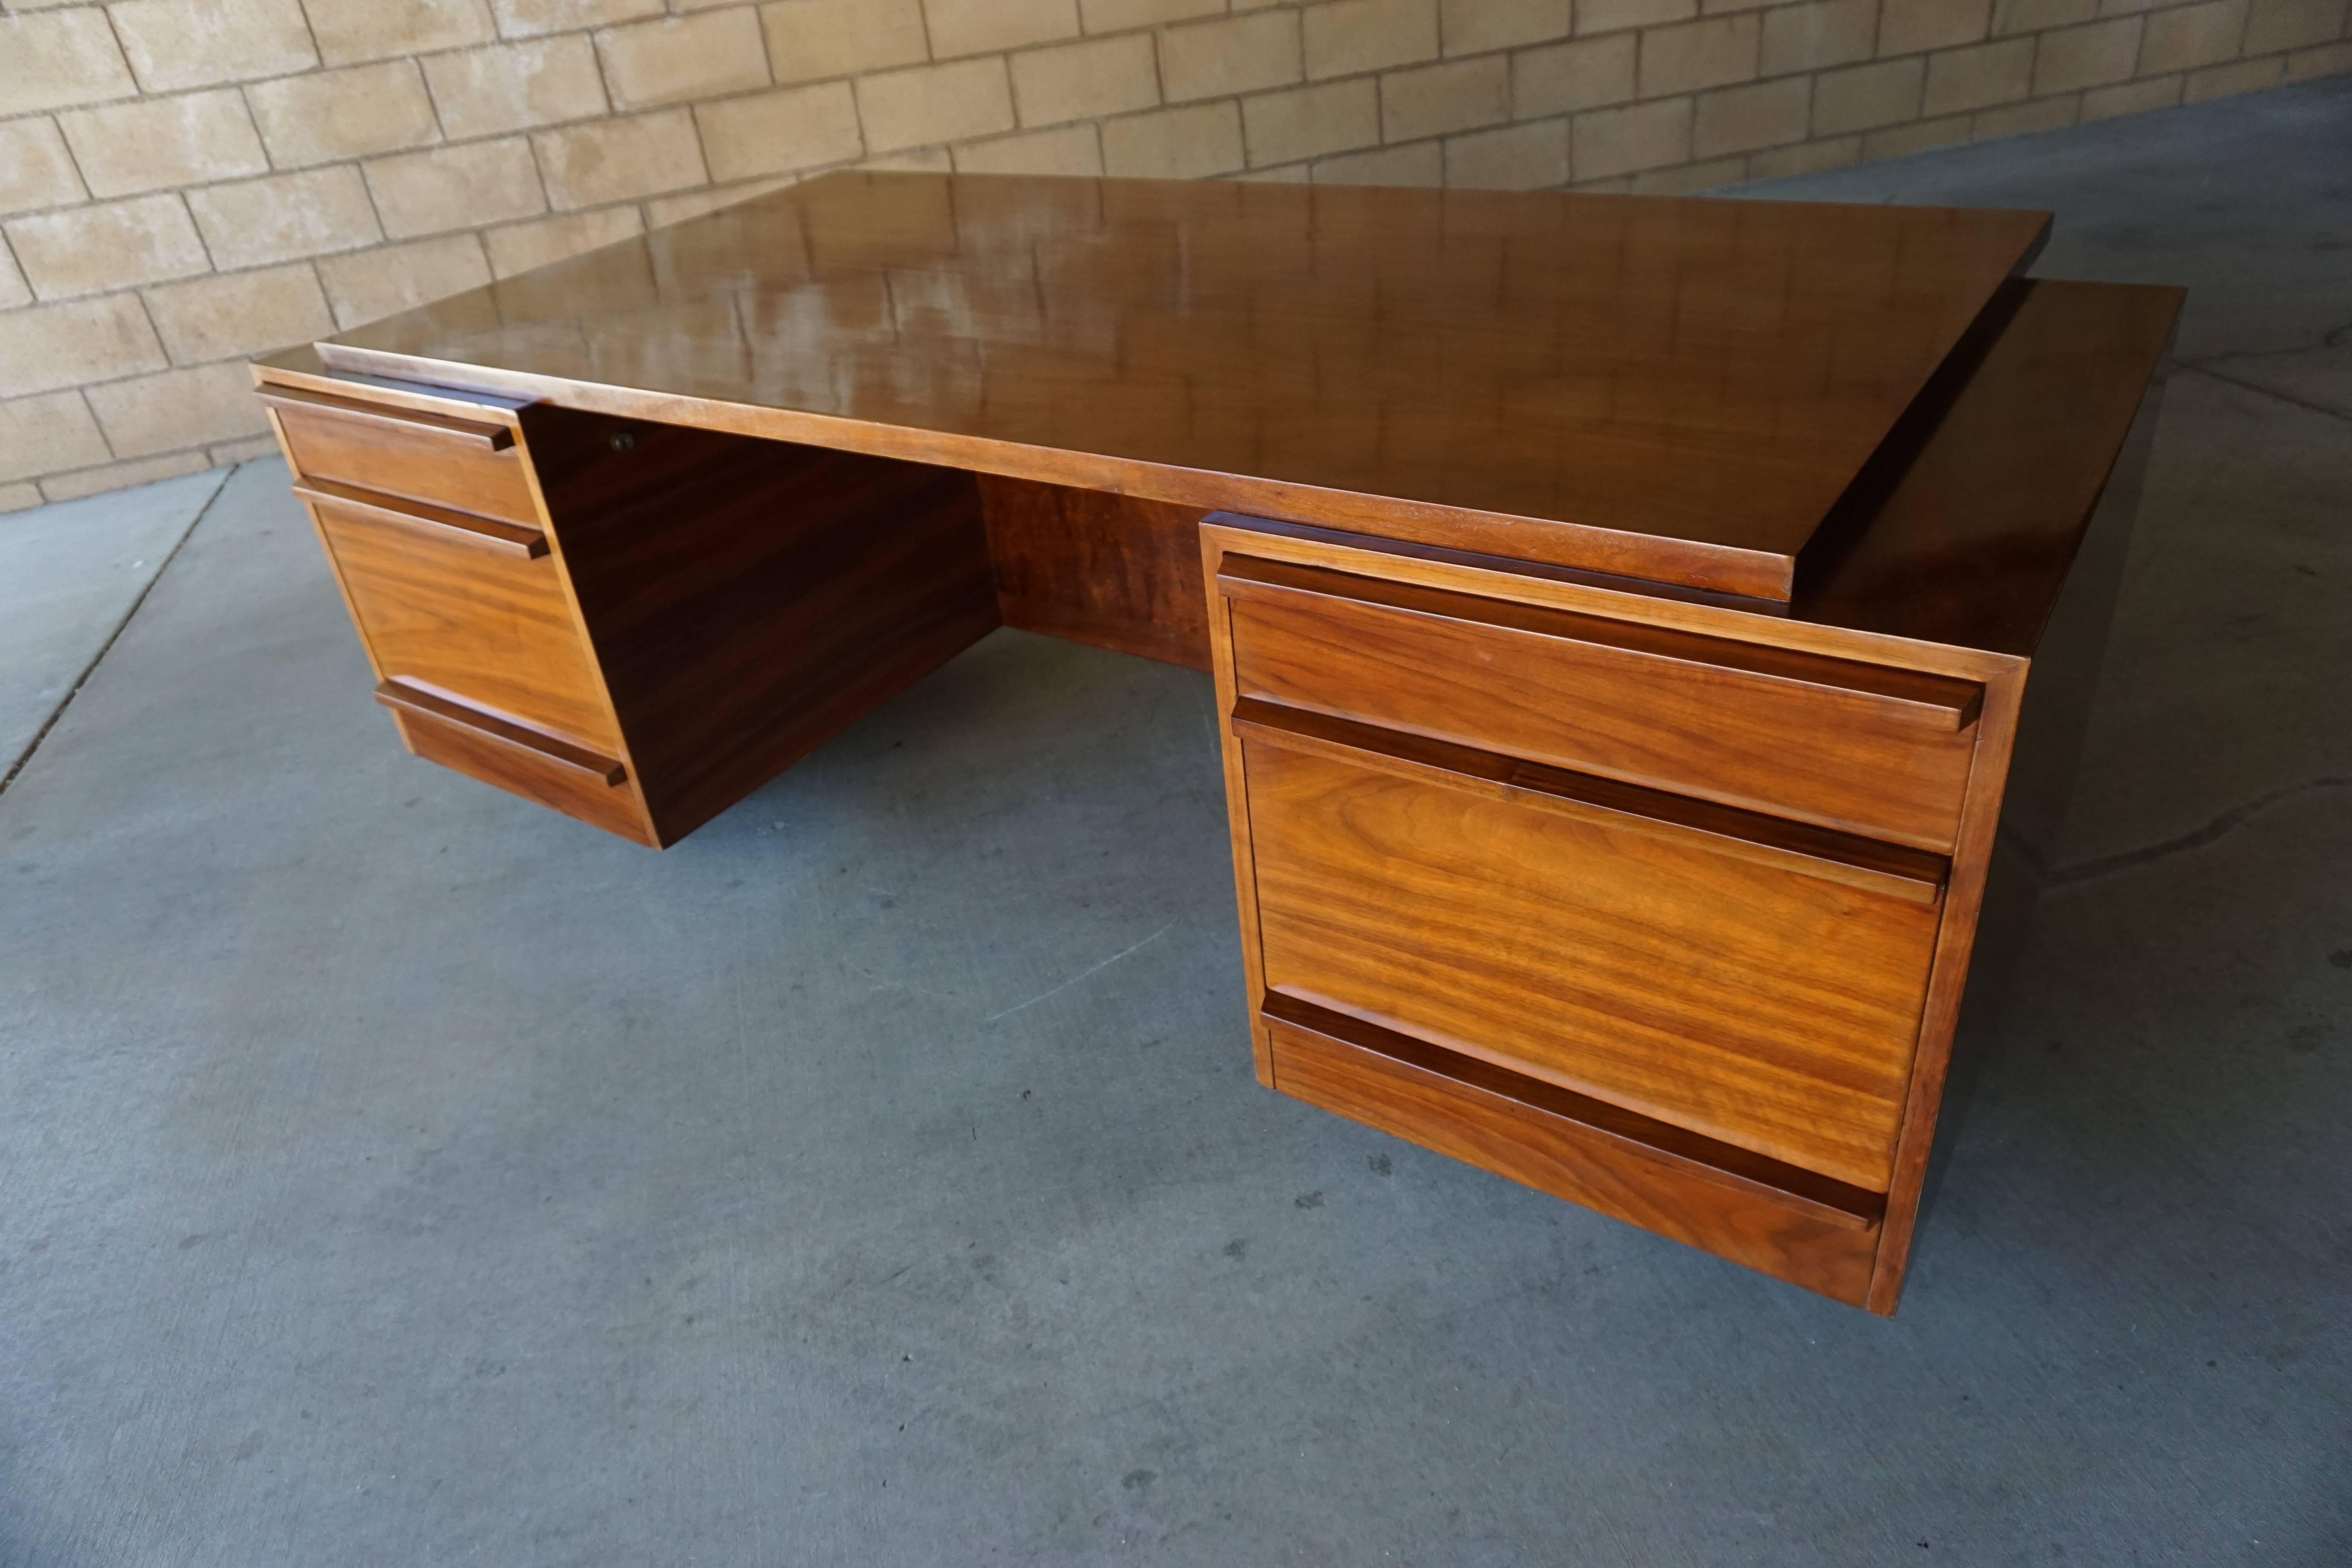 A large and impressive custom-made executive desk from the 1950s. 
A pair of generously proportioned banks of drawers support a large and functional work surface that steps back at the sides and slightly cantilevers over the front. The desk was